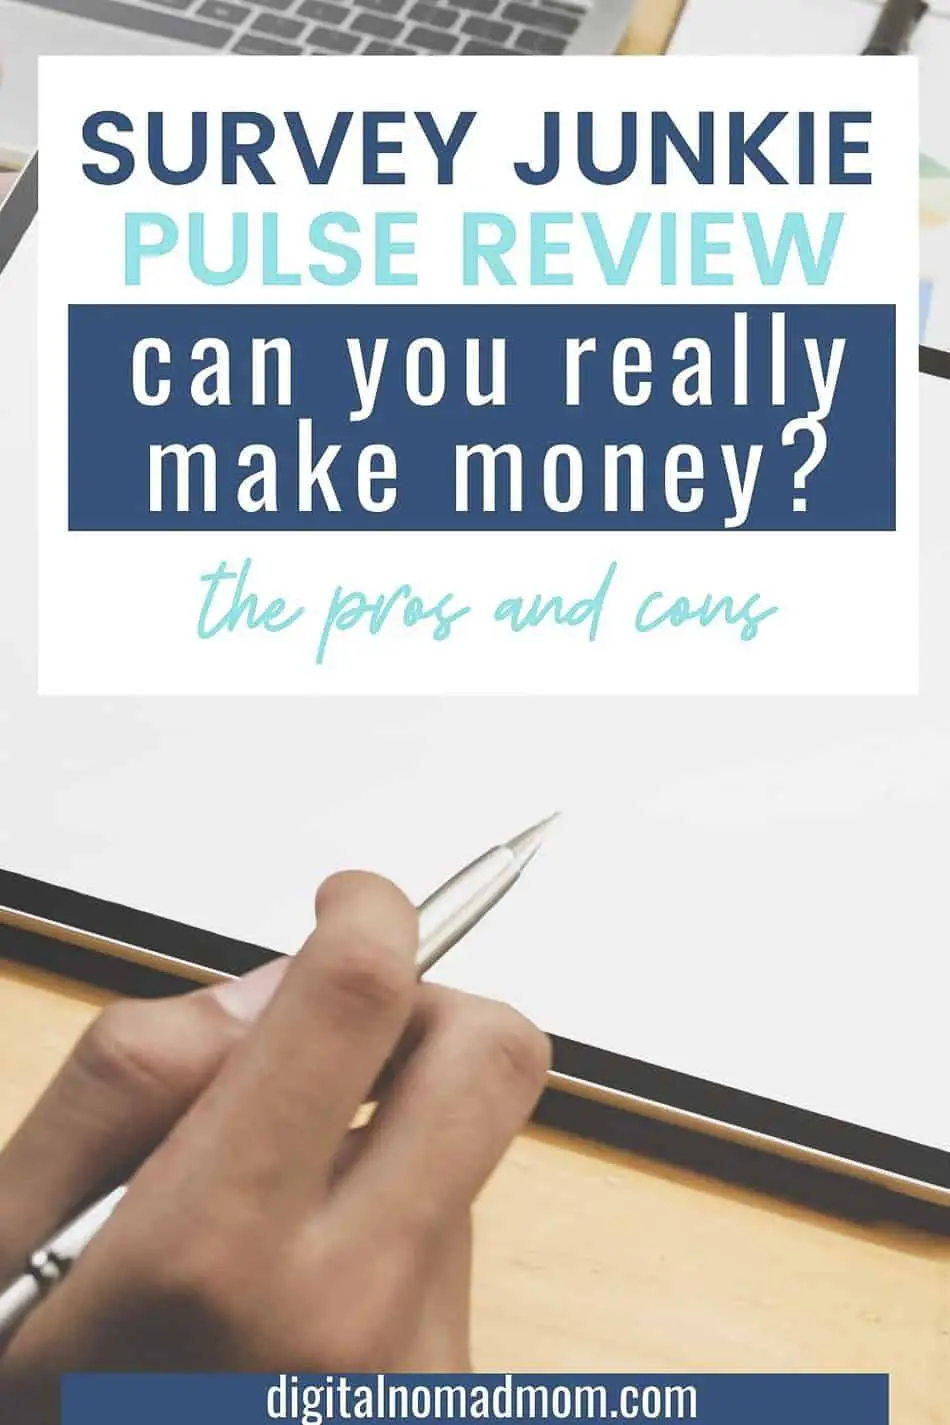 Survey Junkie Pulse Review Can You Really Make Money?